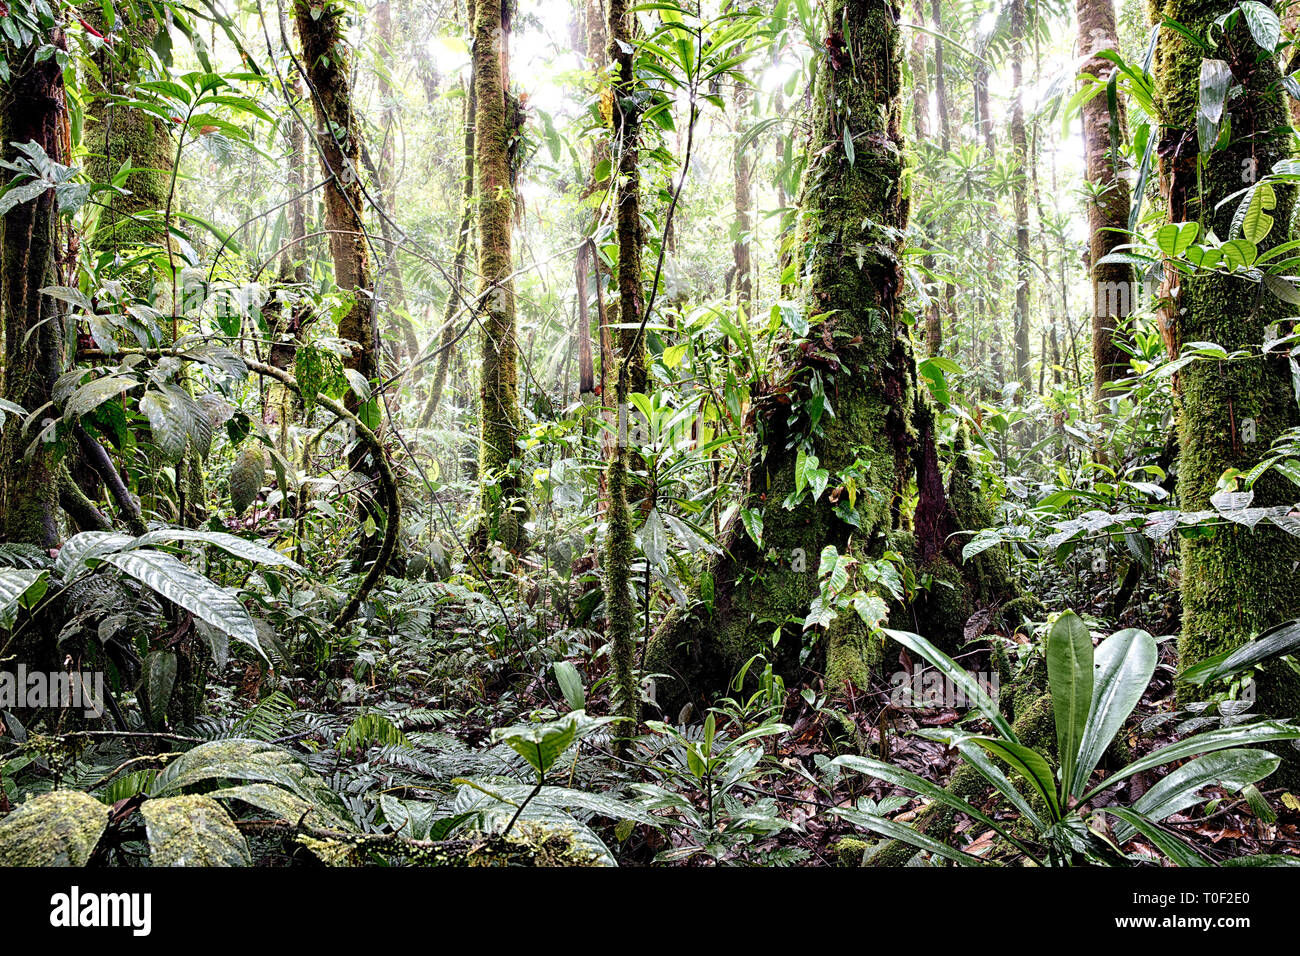 Tropical Amazon rain forest Colombia. Lush reen jungle vegetation with giant trees vines fern and moss Stock Photo